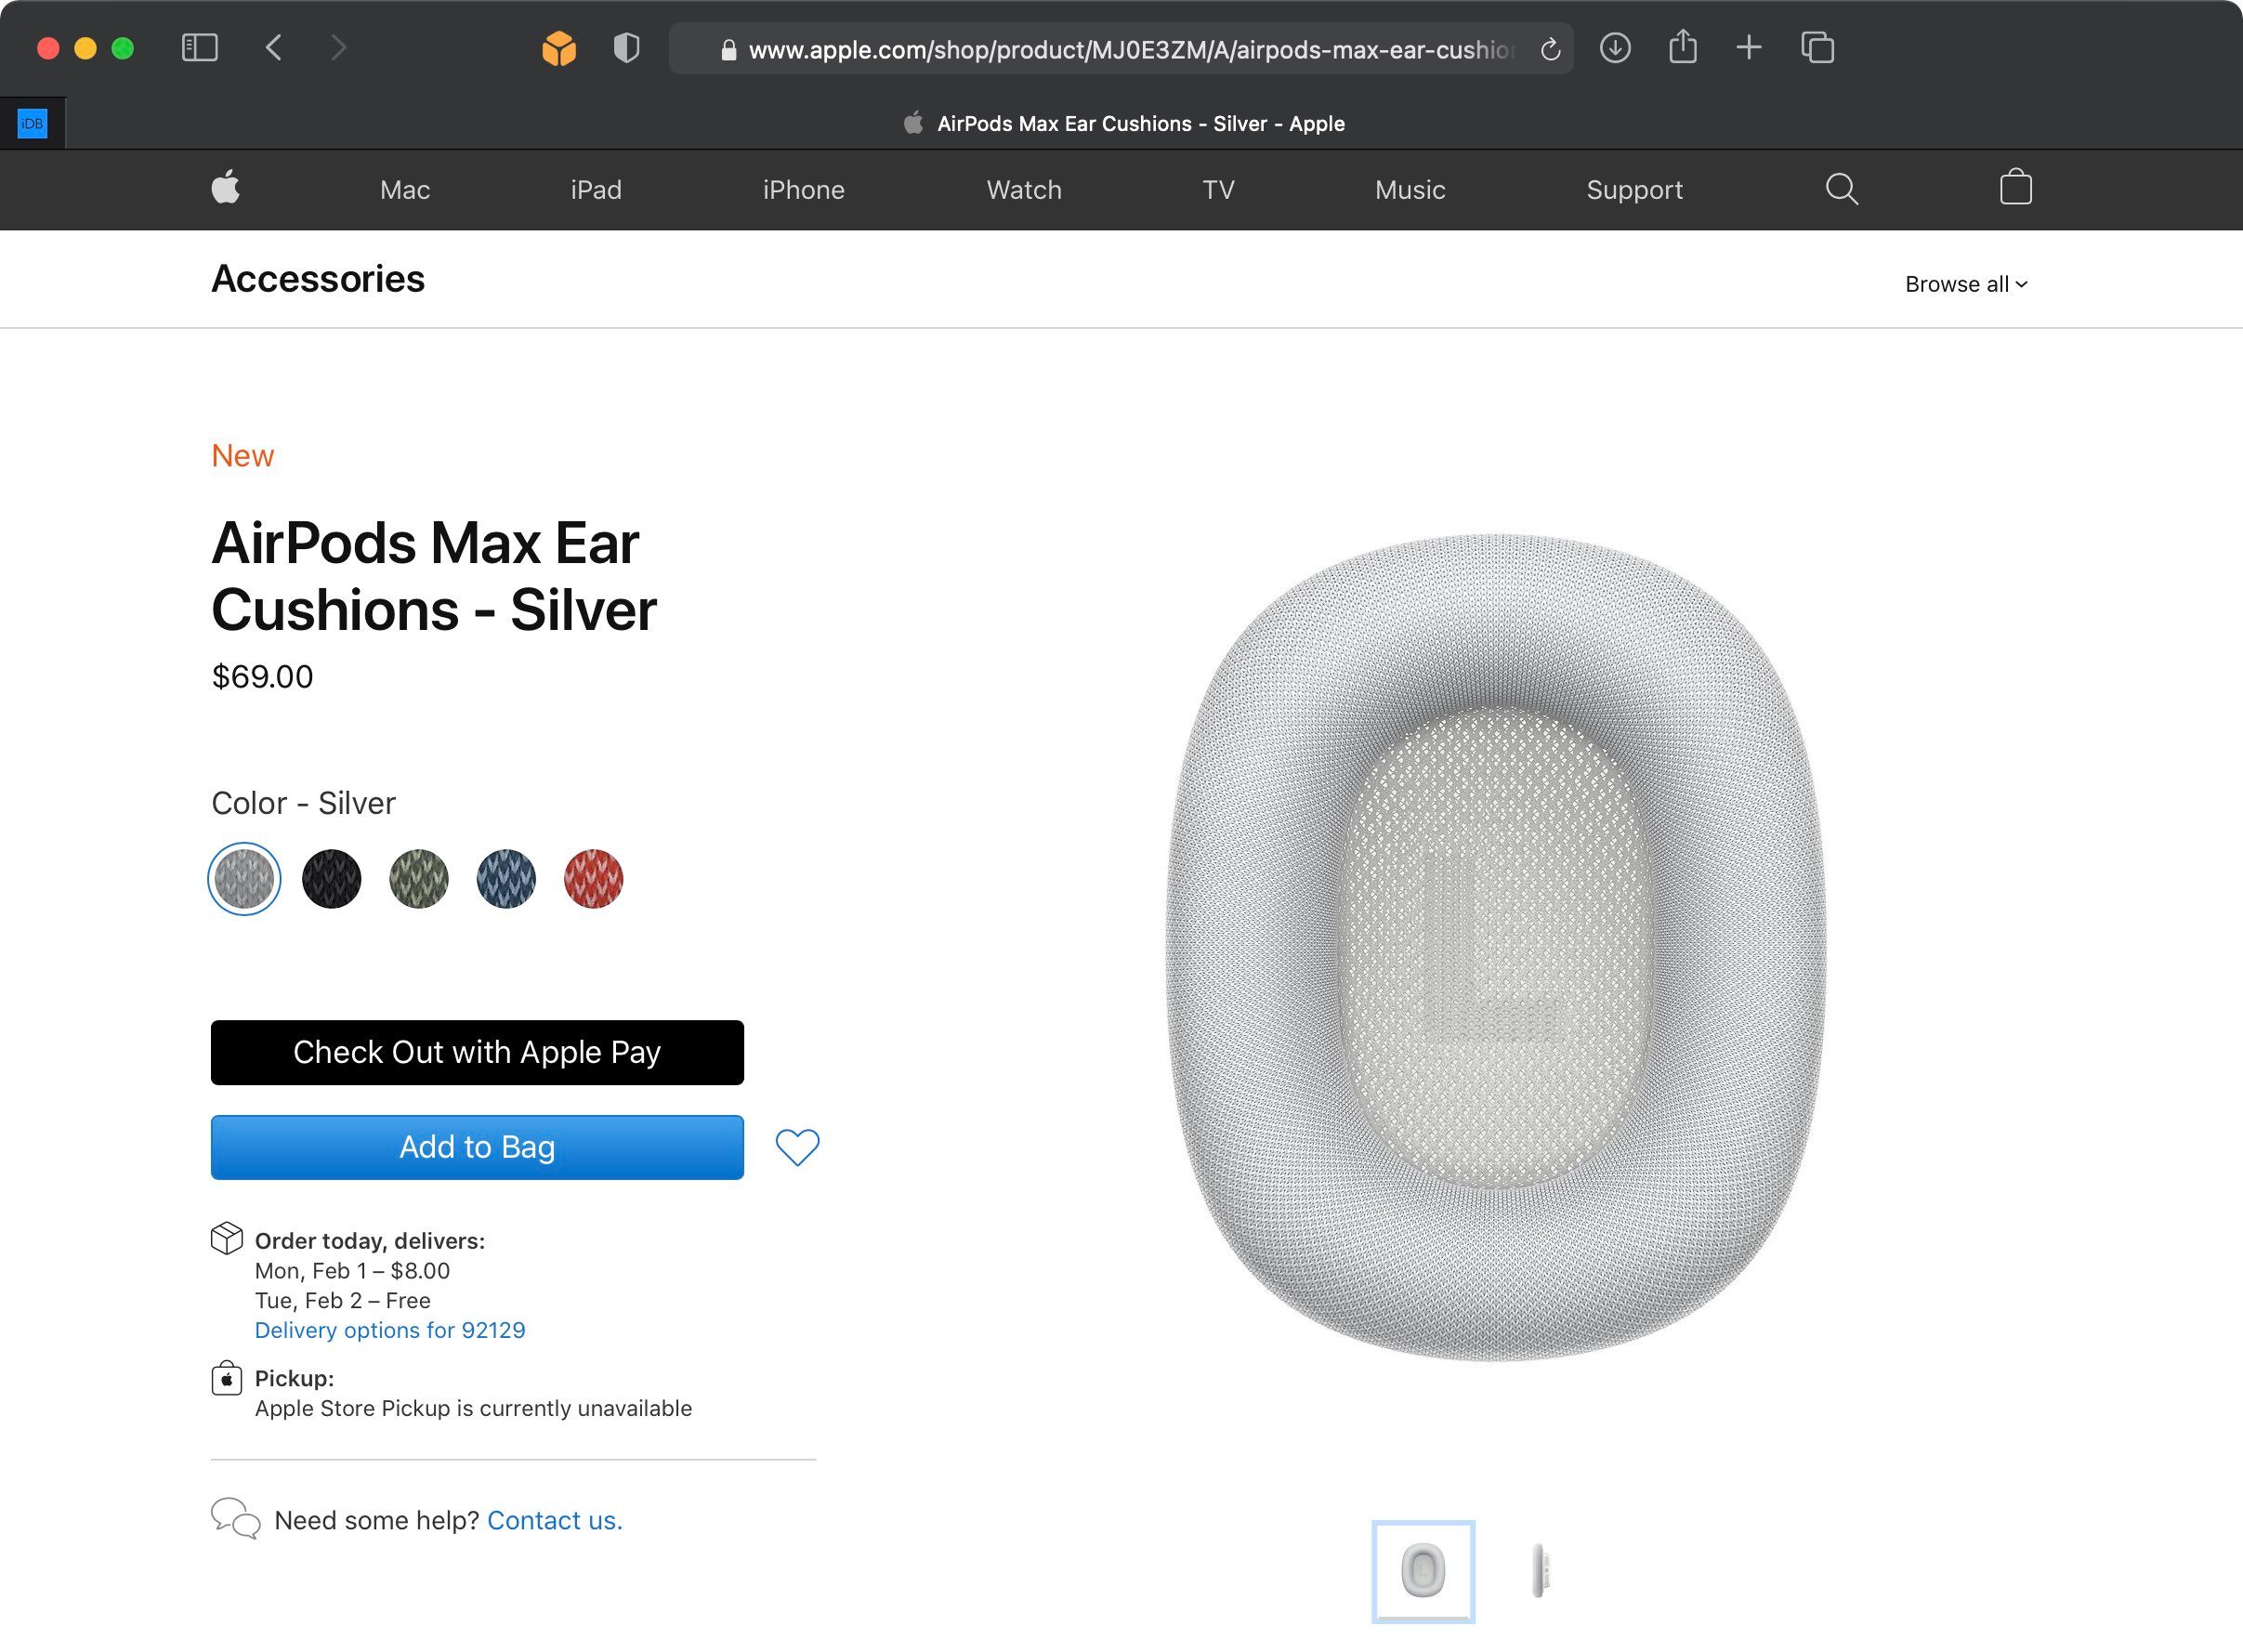 A screenshot of the Apple online store showing the listing for the AirPods Max replacement ear cushions, priced at $69 per pair